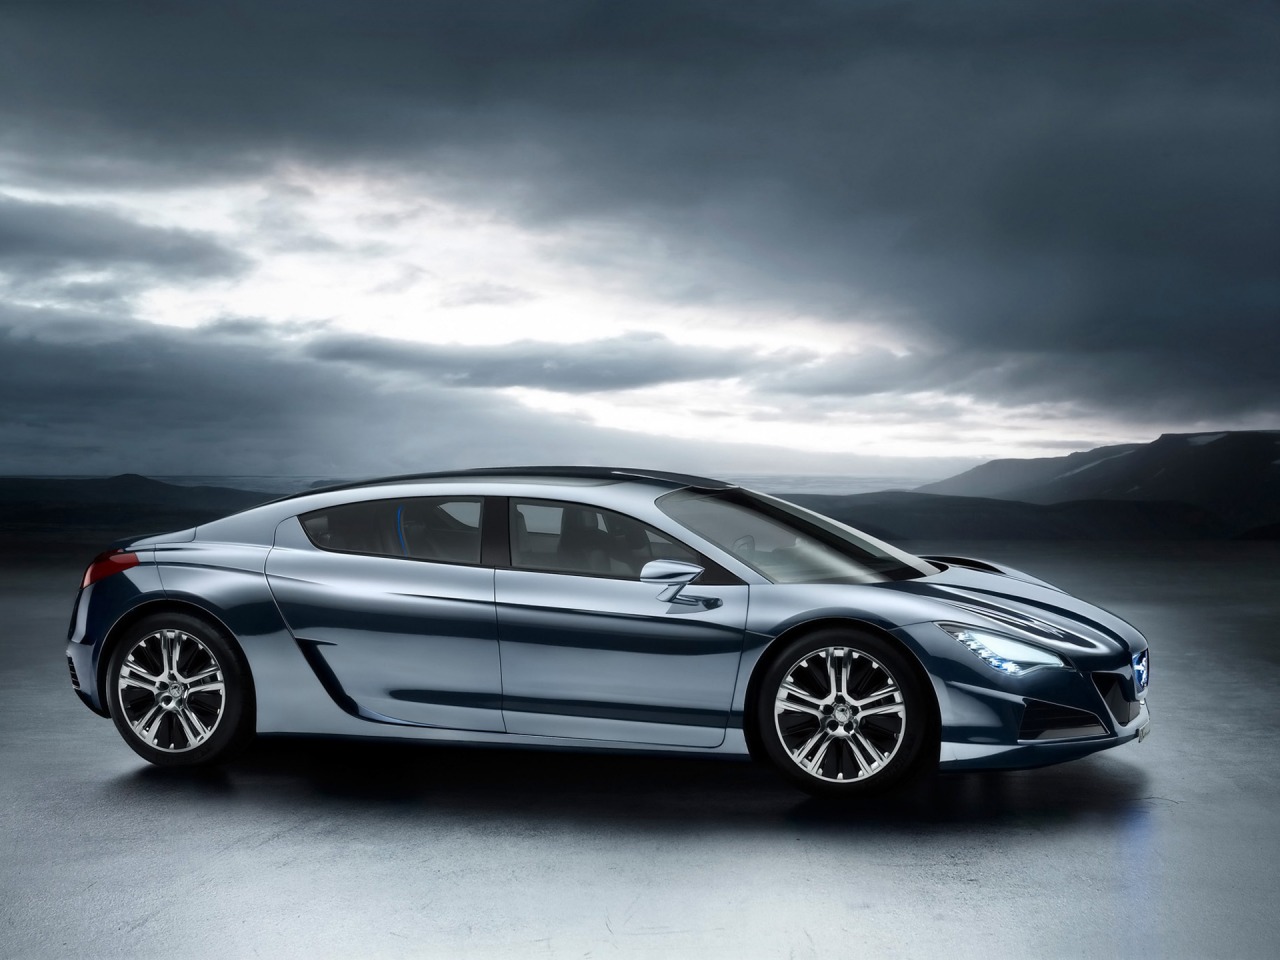 Peugeot Rc Hymotion4 Wallpaper Cars In Jpg Format